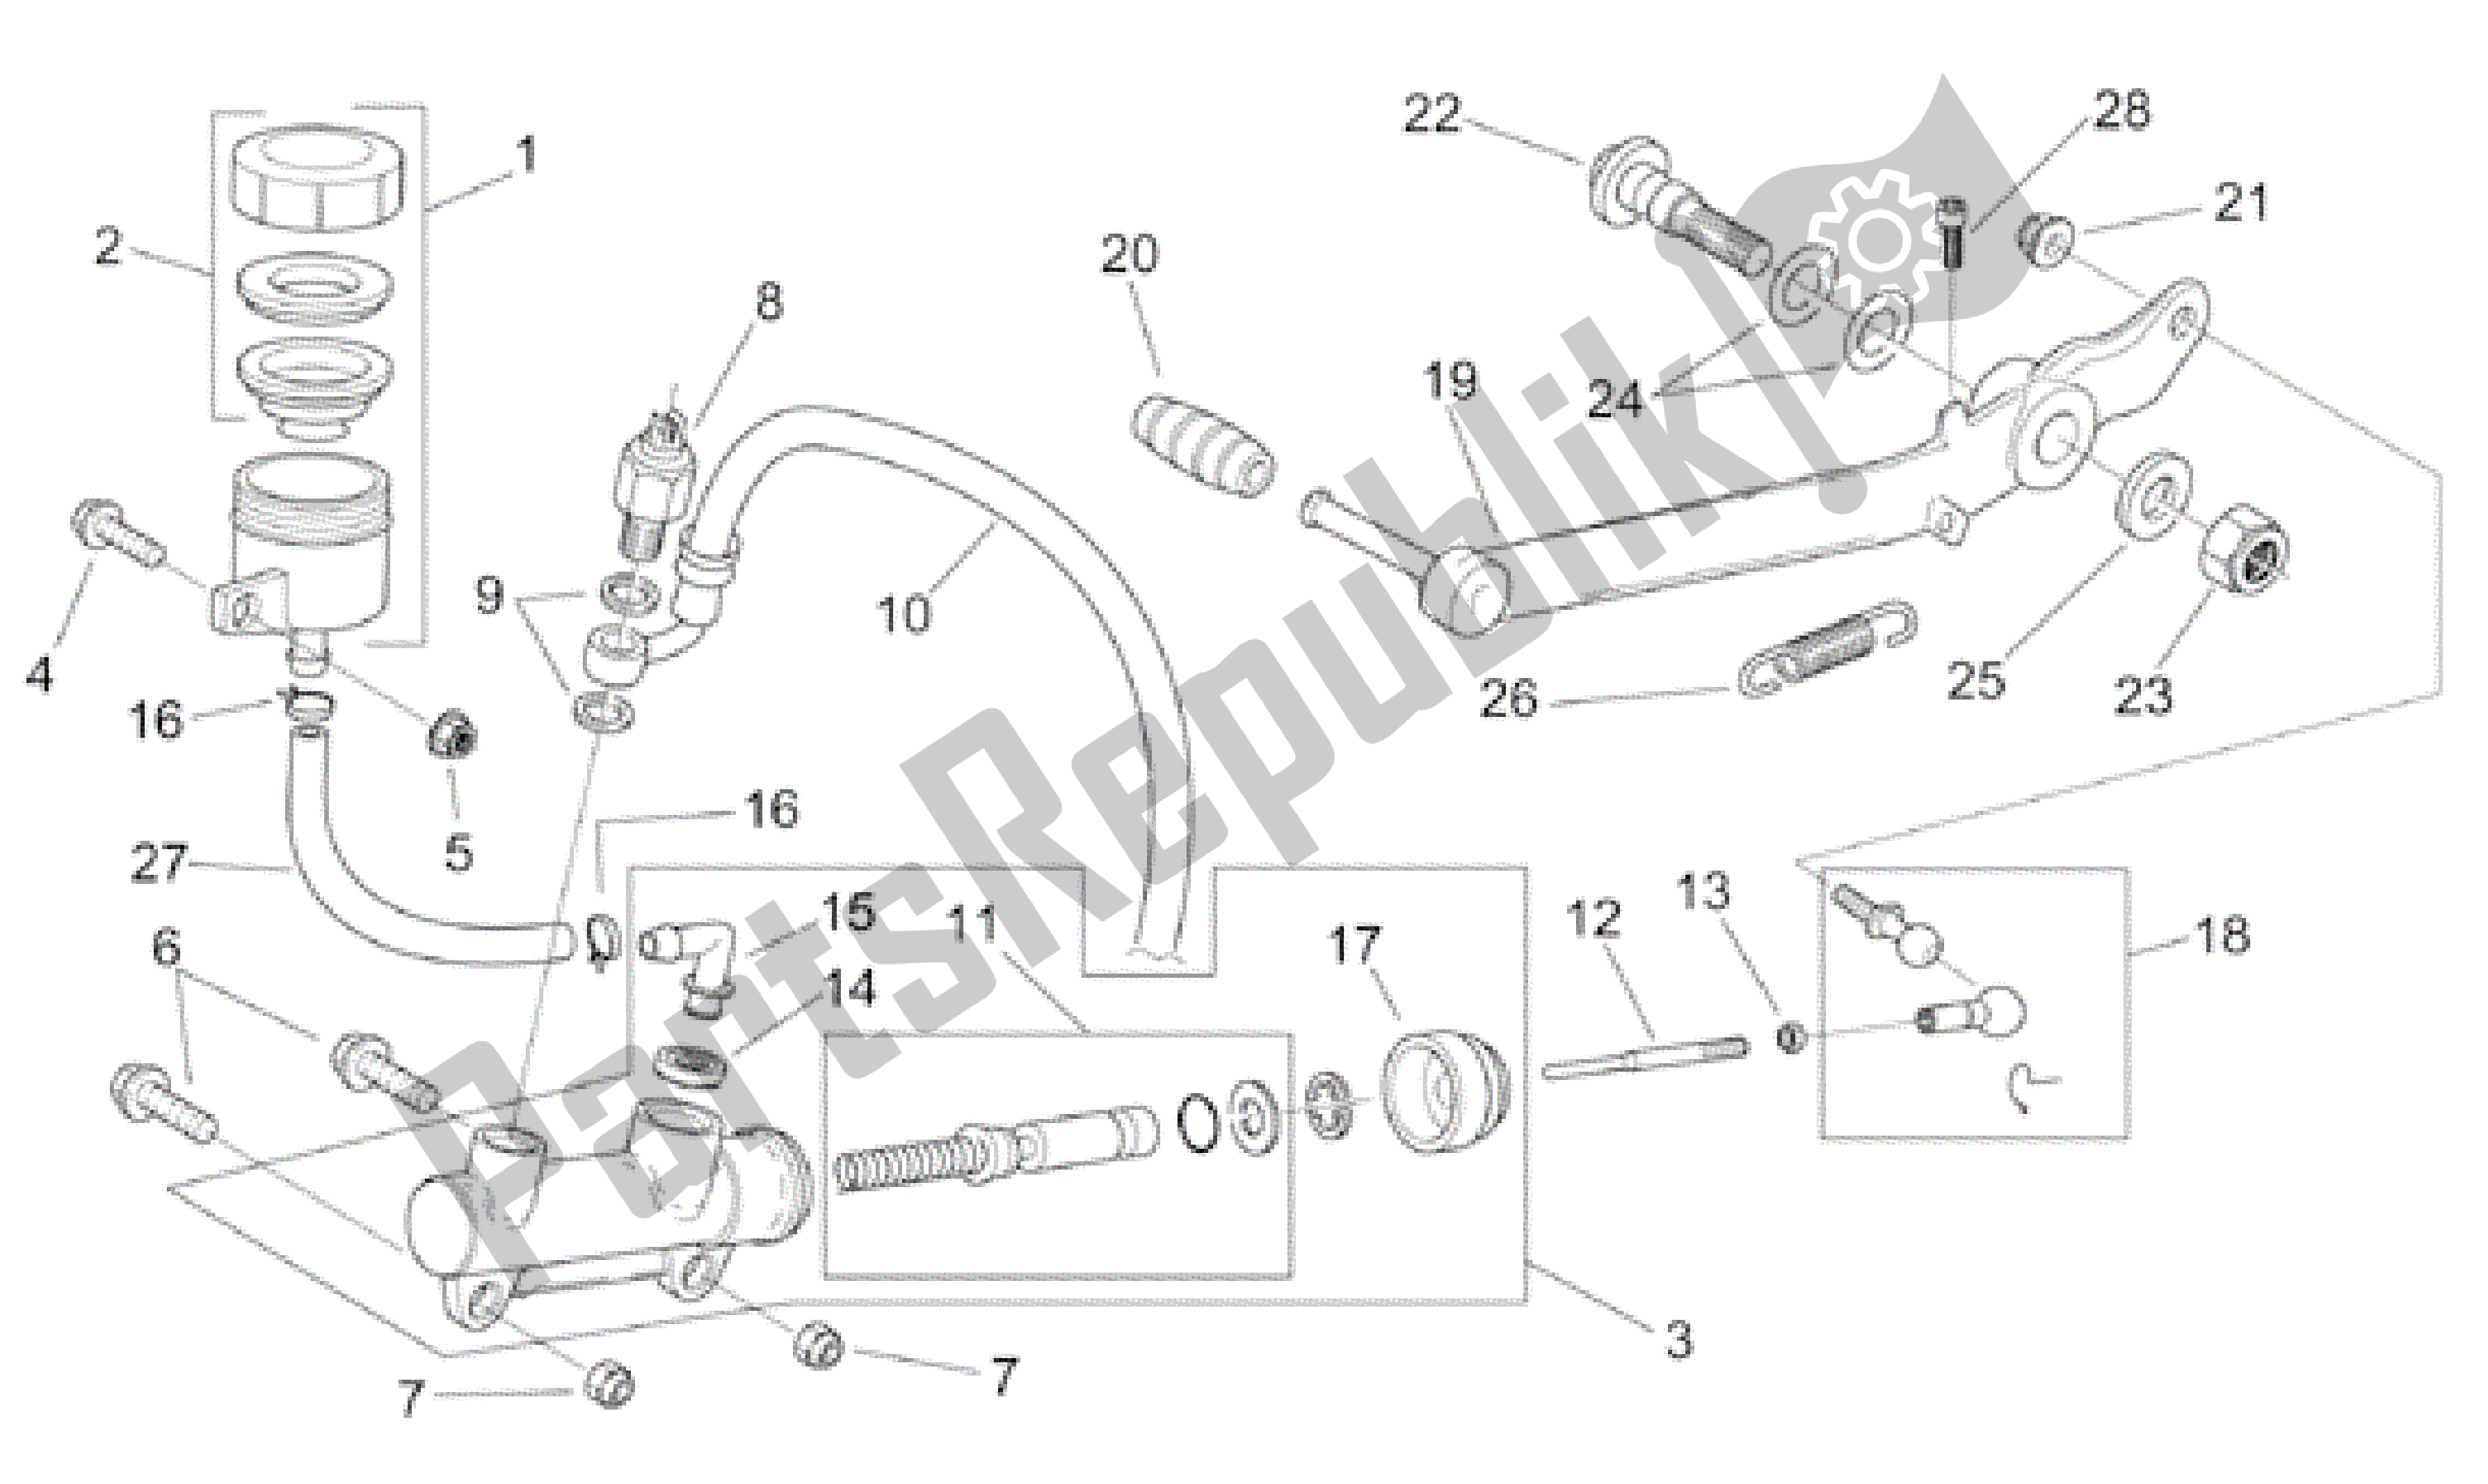 All parts for the Rear Brake Pump of the Aprilia RS 50 1999 - 2005